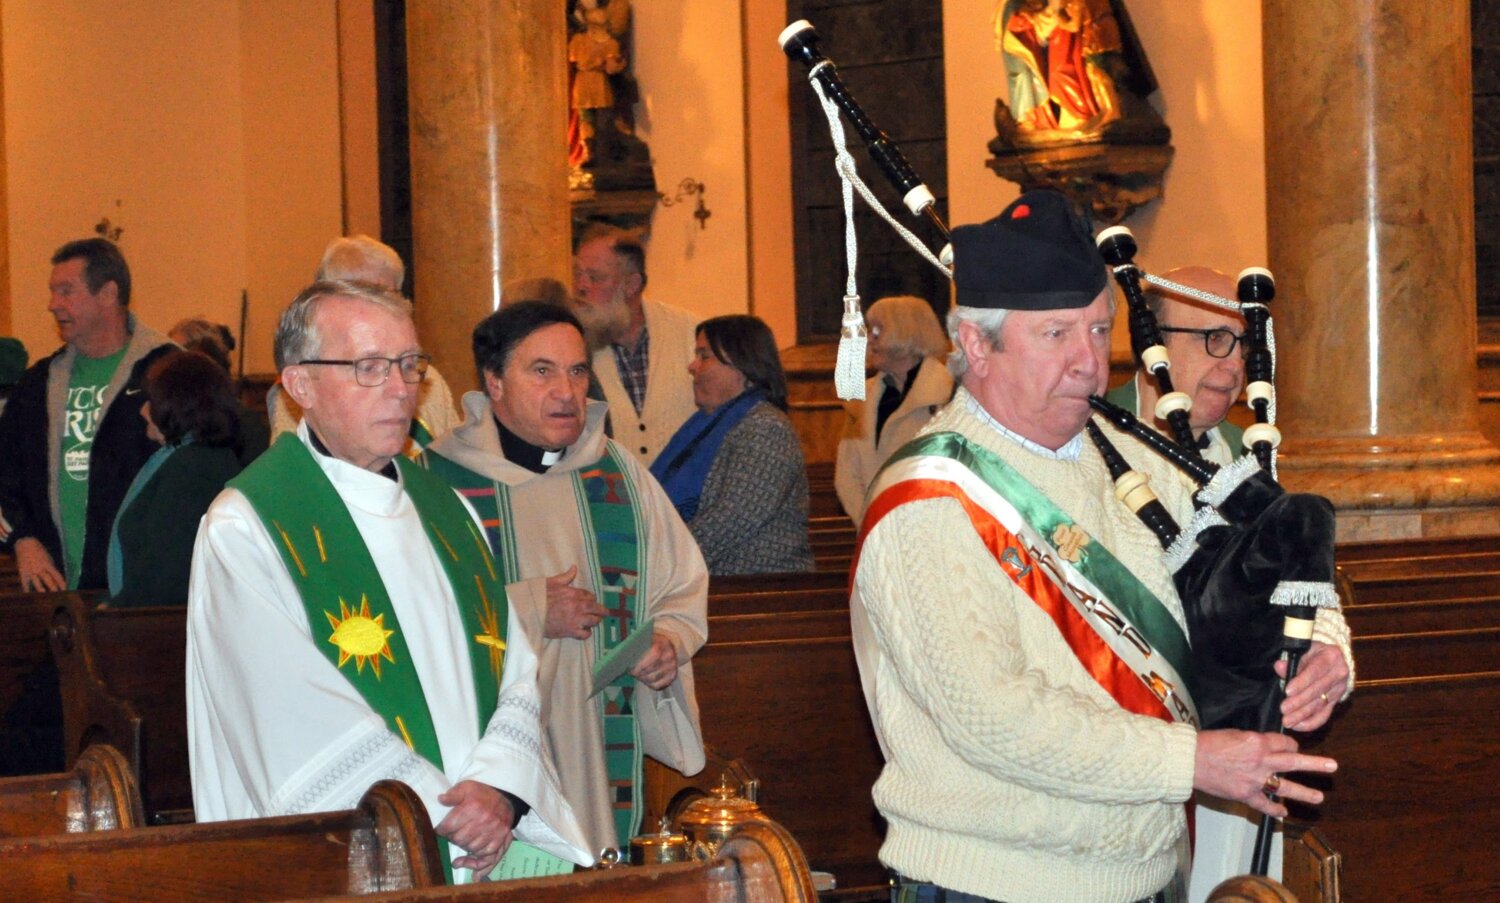 The honor of St. Patrick returned to its’ traditional home at St. Joseph and St. Patrick’s Church, the youth home parish of Saint Marianne Cope on Friday, March 17. For local Hibernians, the religious aspects of the celebration of the patron saint of Ireland is foremost in their observances and dozens of members of the Oneida County Ladies and Men’s Ancient Order of Hibernians were in attendance for the Mass. The principal celebrant was Rev.  Tom Servatius, who was joined by Deacon Tim Foley, Rev. Jim Cesta, Rev. Joe Salerno, and Peg O’Toole, of the LAOH.